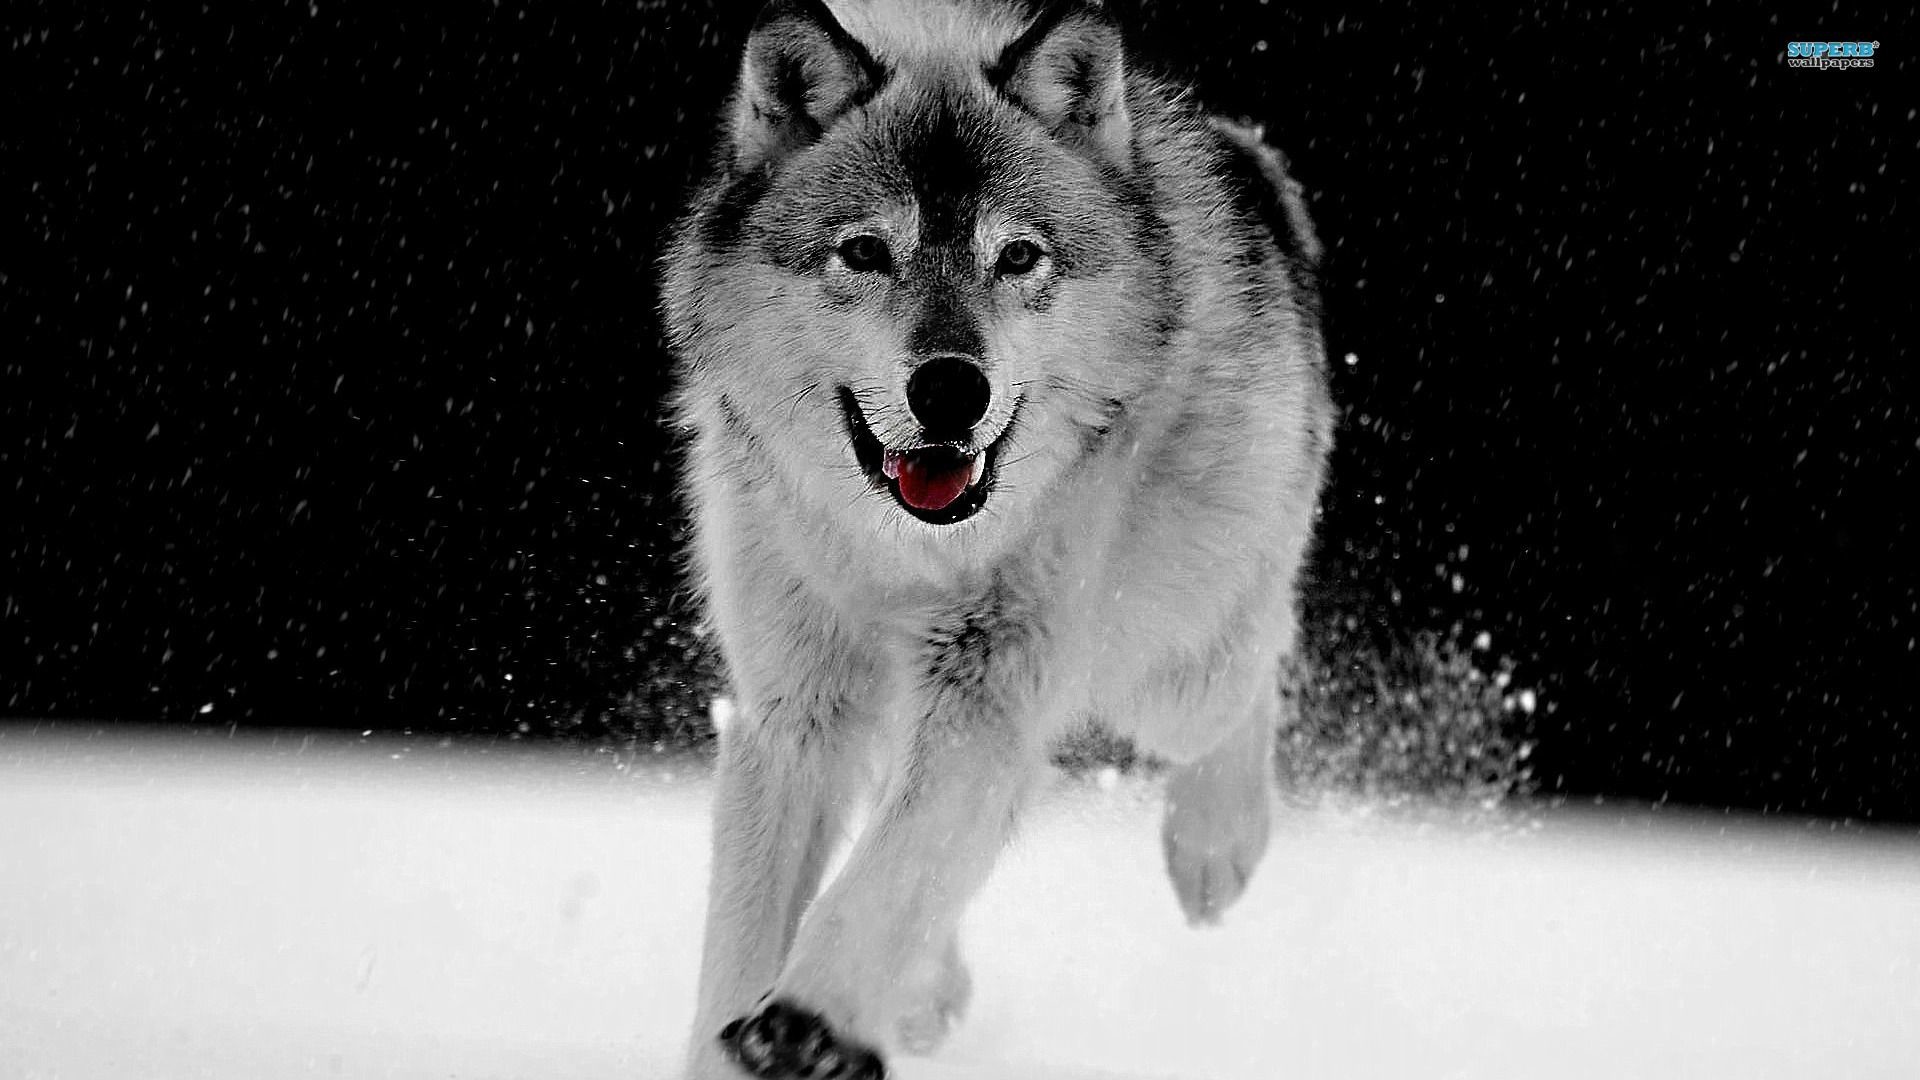 1920x1080 LyhyXX Wallpapers: Awesome Wolf Images, Malia Heer